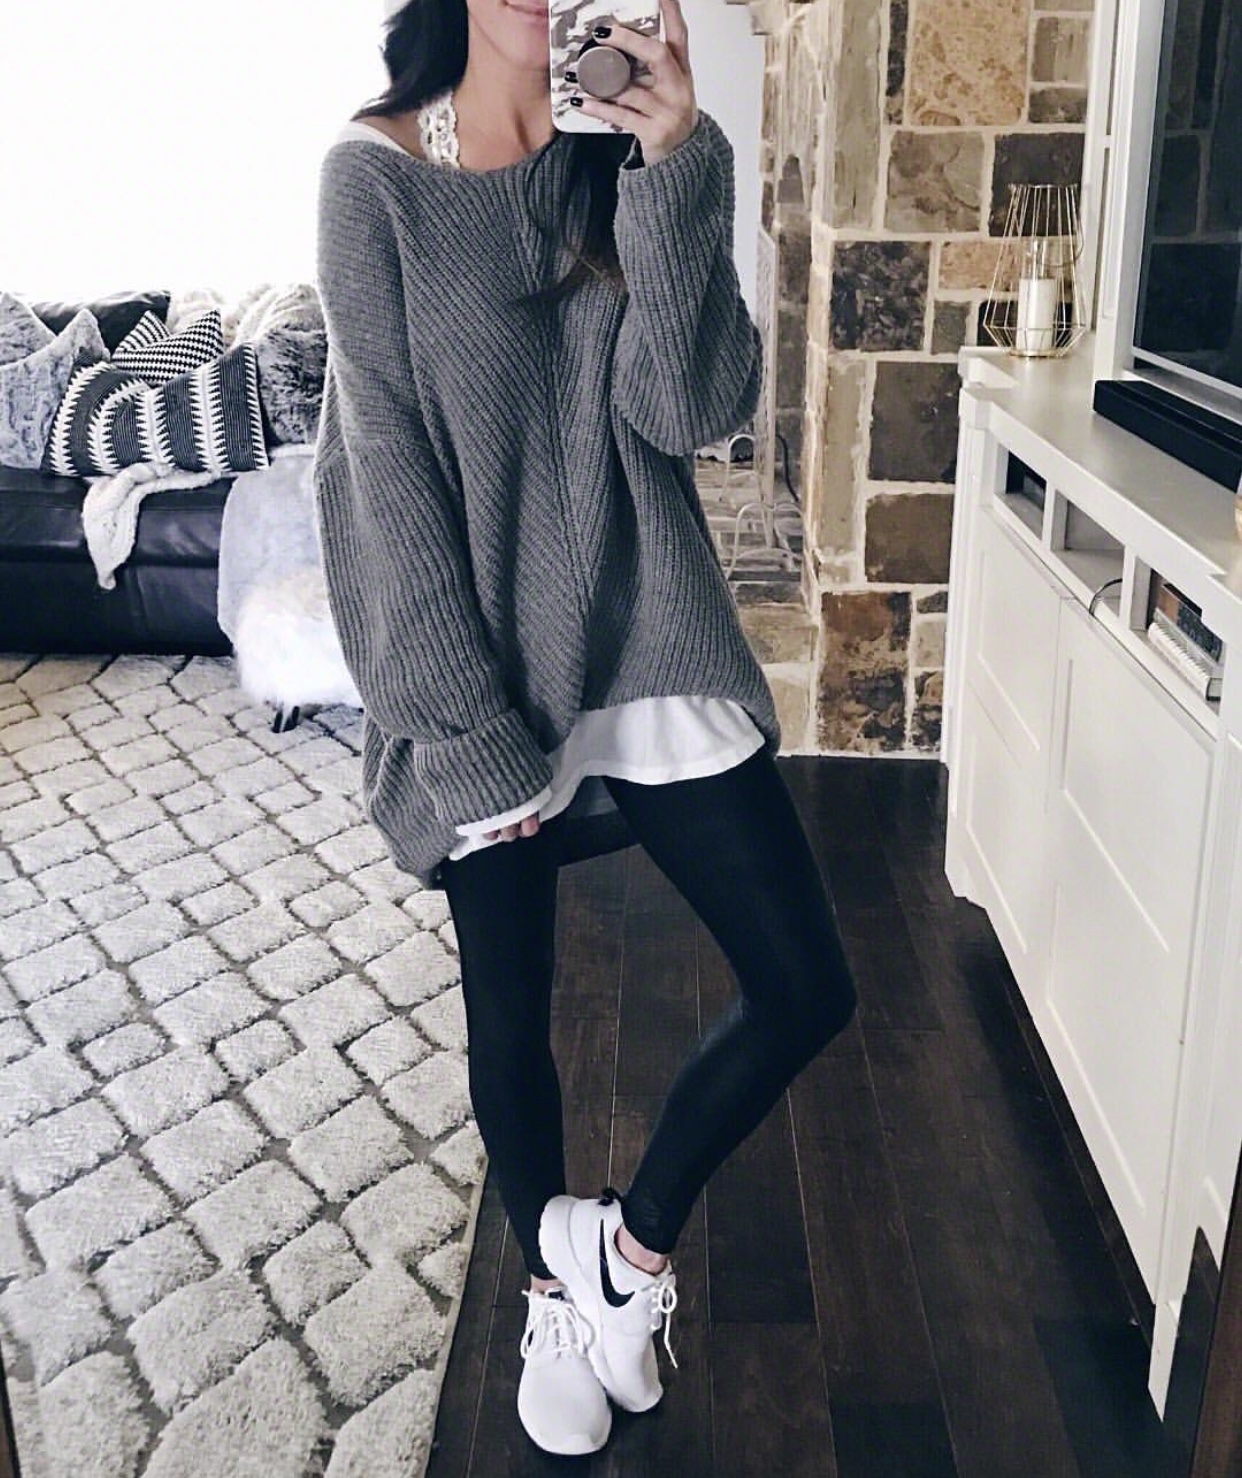 legging outfit 